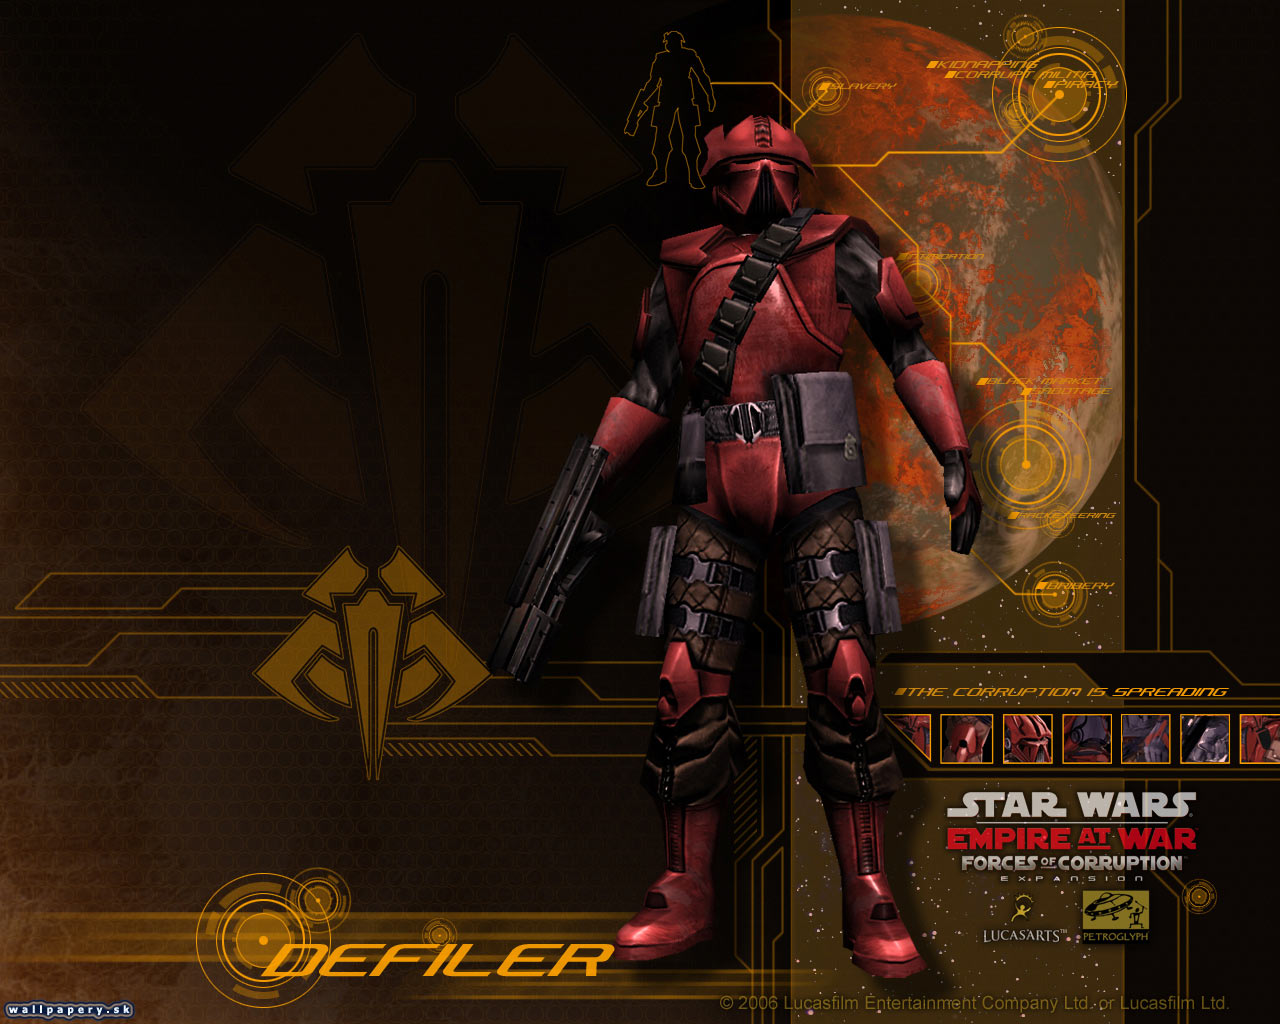 Star Wars: Empire At War - Forces of Corruption - wallpaper 13